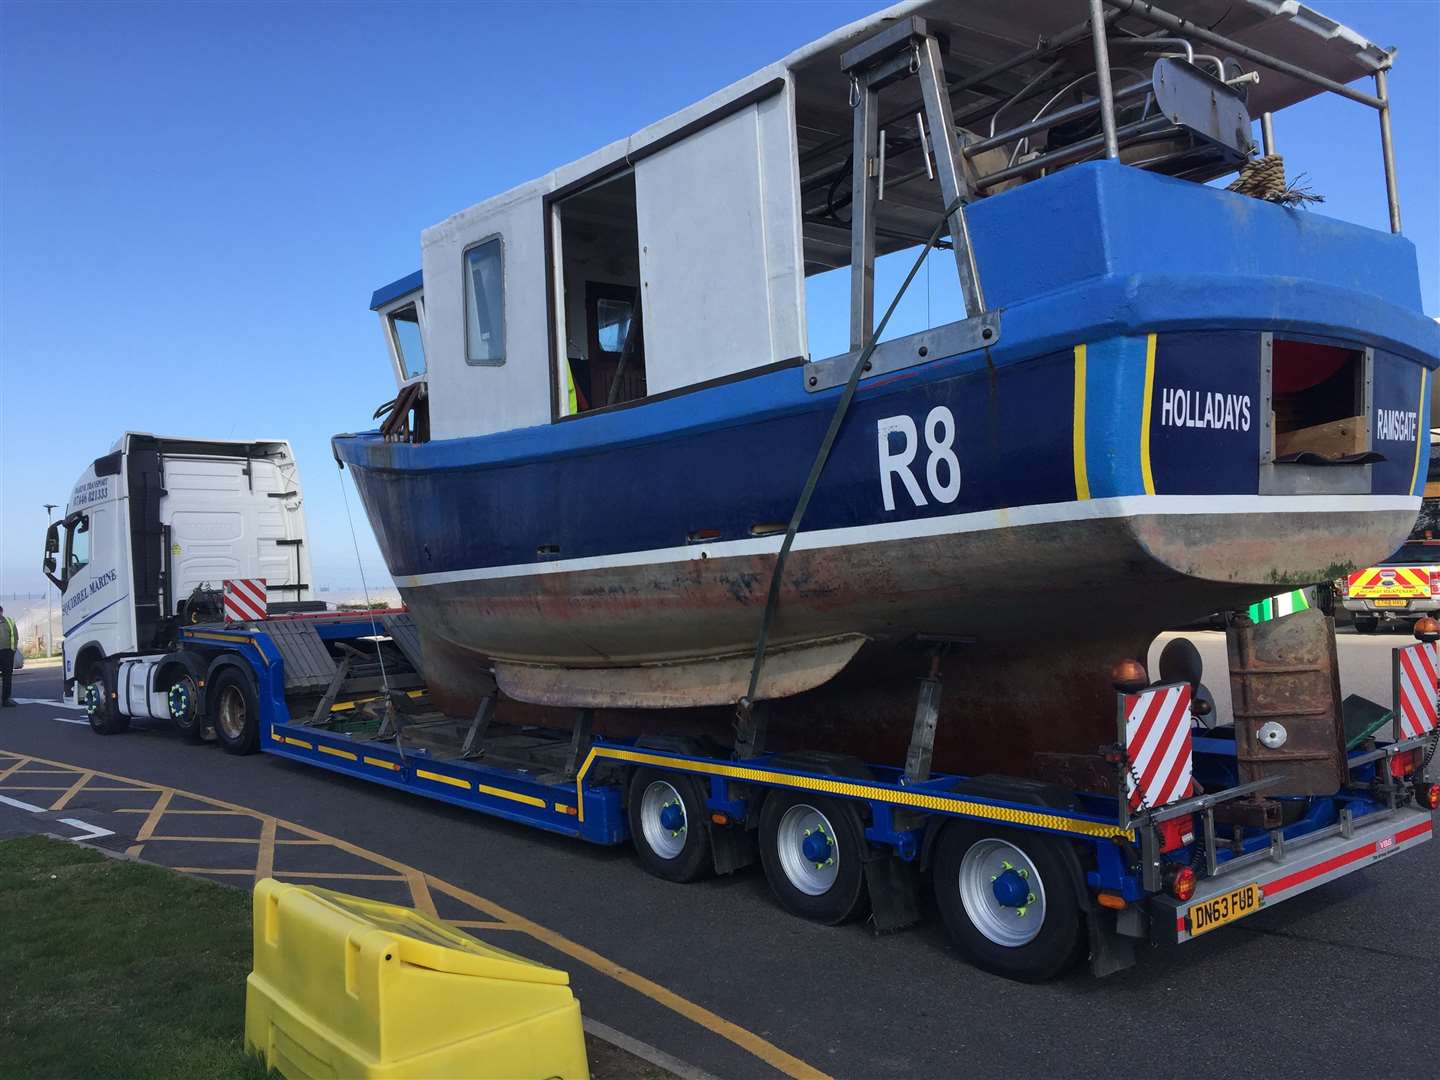 Chris Attenborough had his boat brought to a service station on the Thanet Way